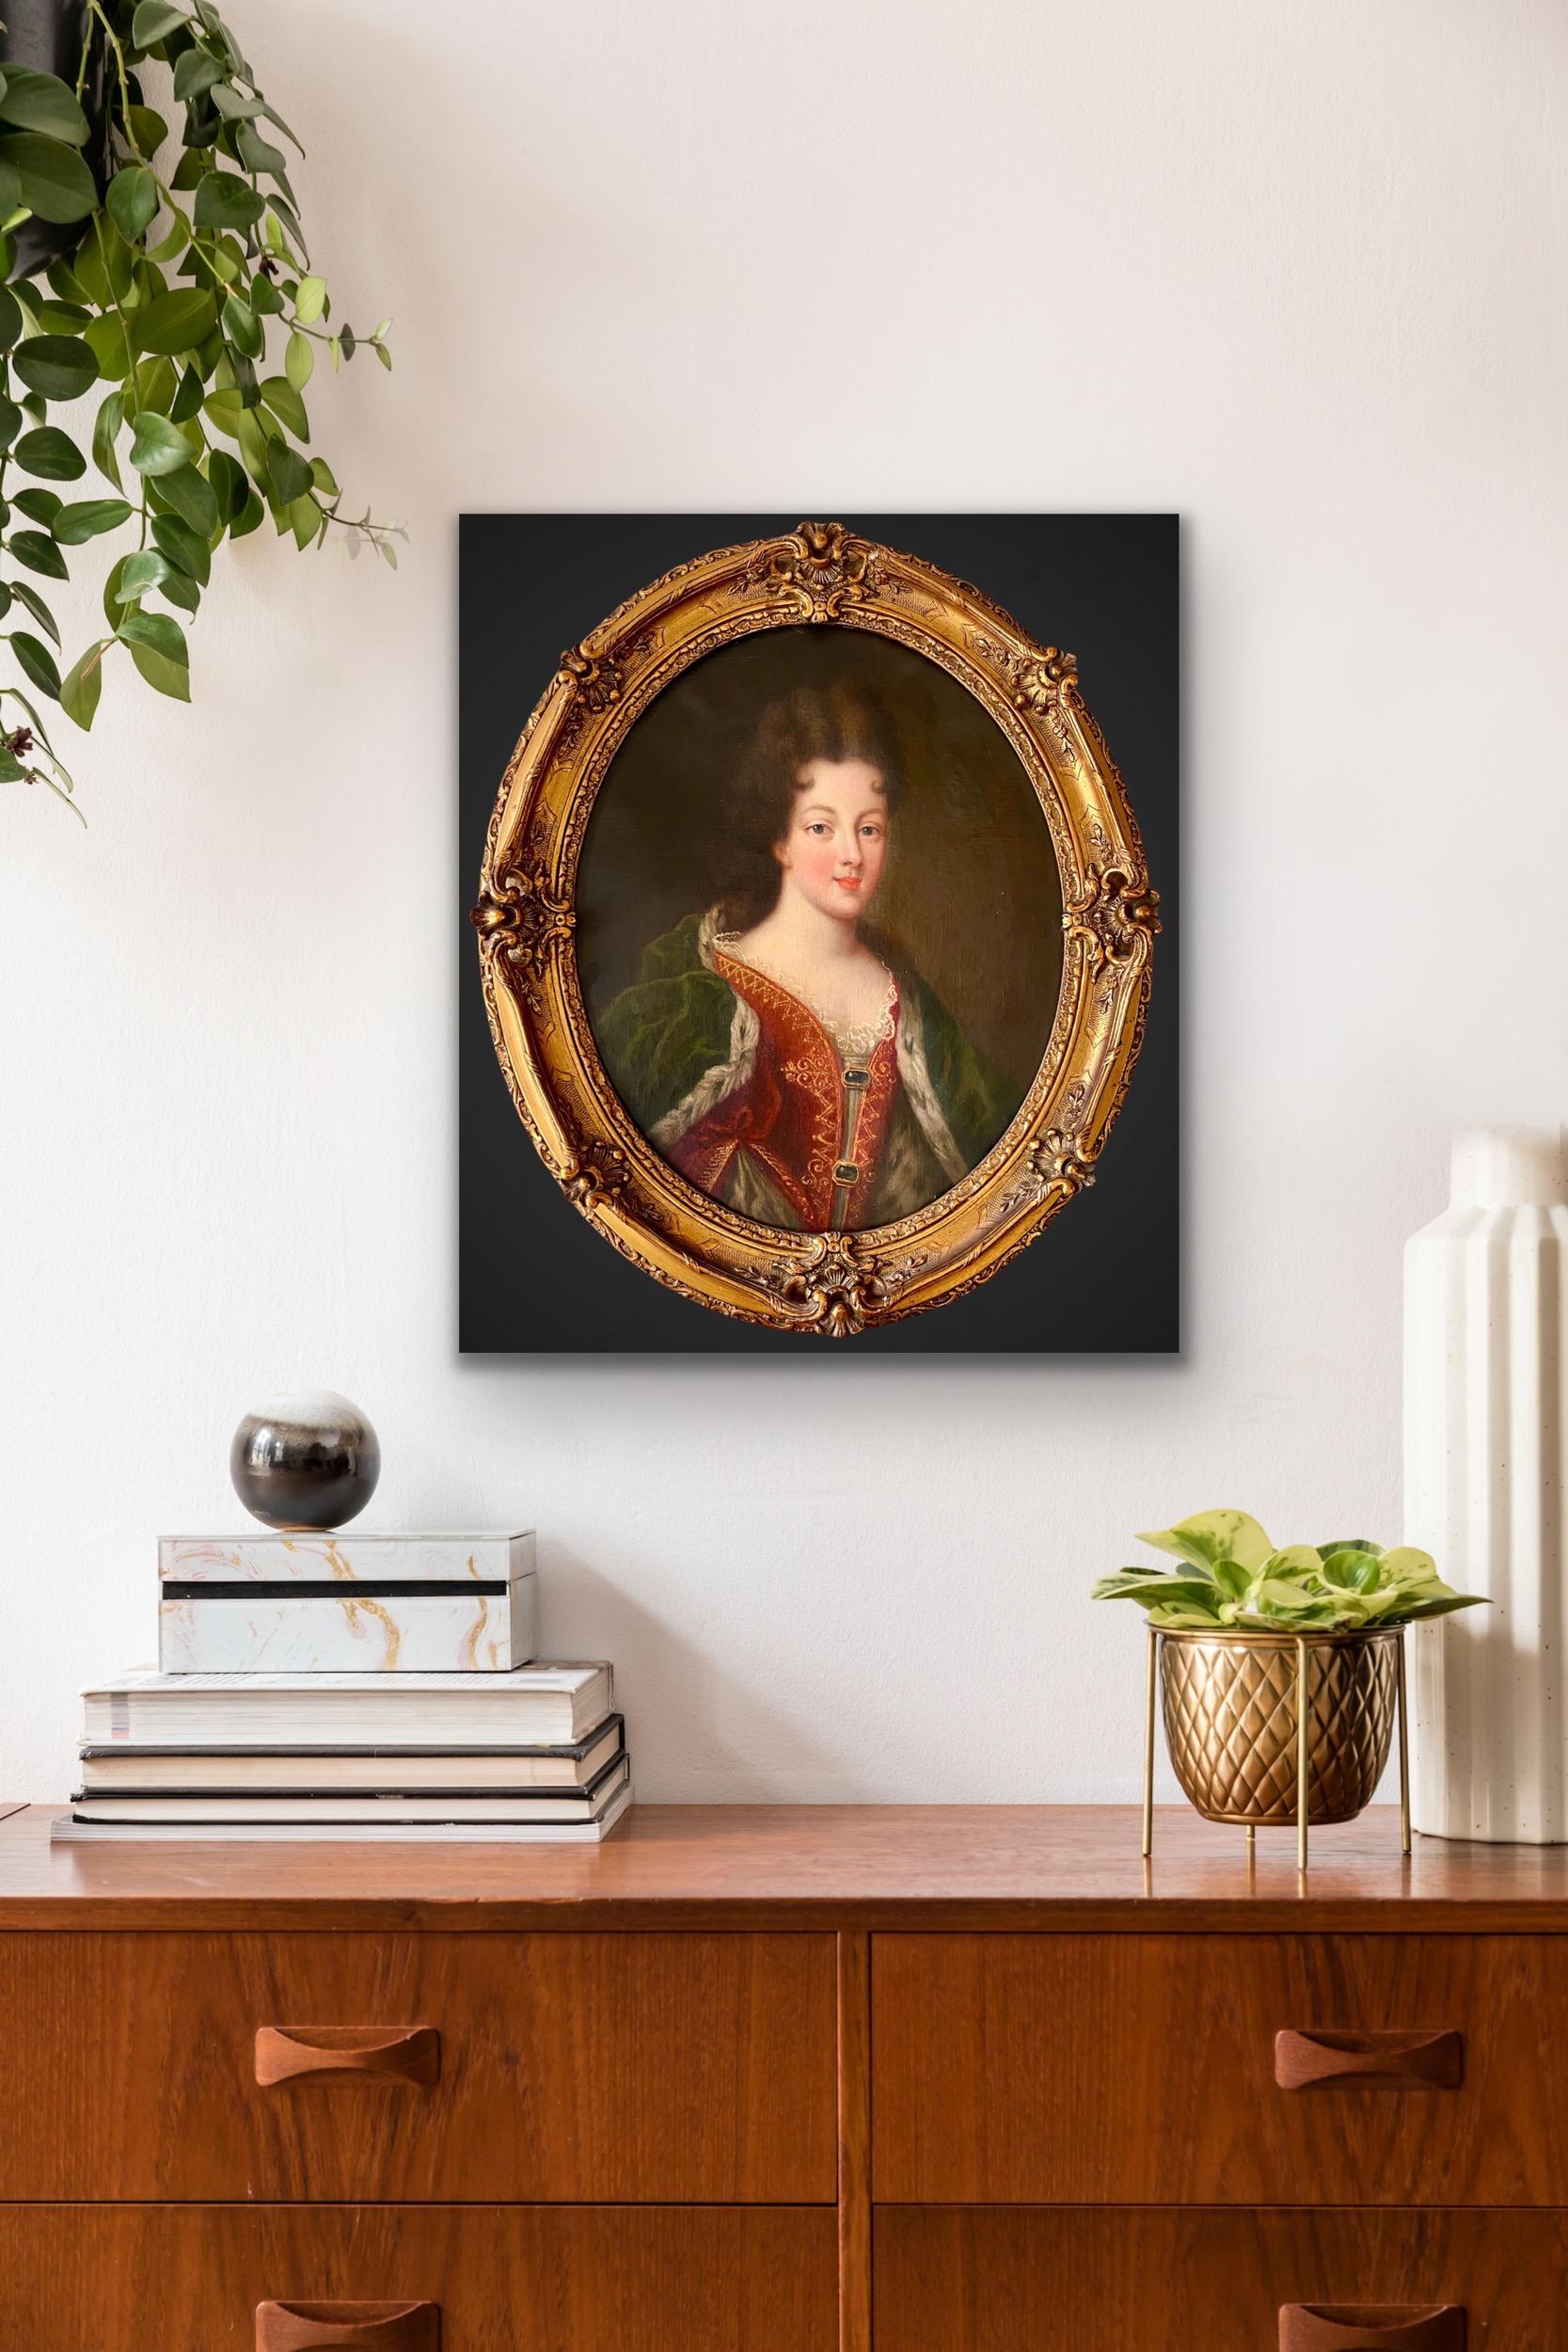 Antique French portrait depicting a young noble lady, possibly a princess.

This sensitively rendered portrait shows a luxuriously dressed beauty, who's wearing an elaborate deep red silk dress with golden embroideries and an elegant lace ruffled